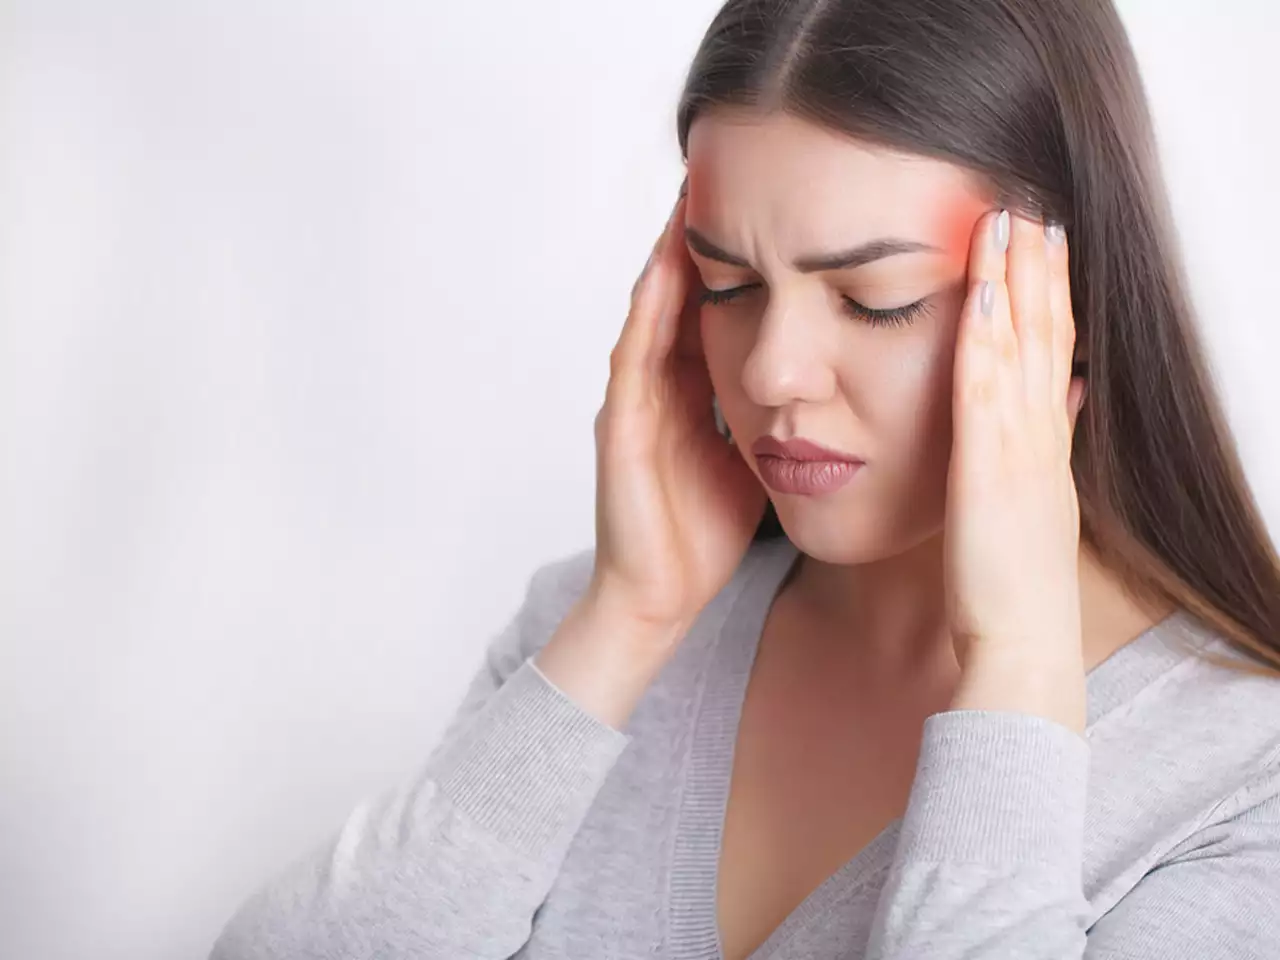 Discover the environmental triggers behind migraine pain. Explore how factors like light, sound, weather, and more can influence migraine attacks. Learn to identify and manage these triggers to gain better control over your migraine episodes. Start your journey to migraine relief with our expert insights.